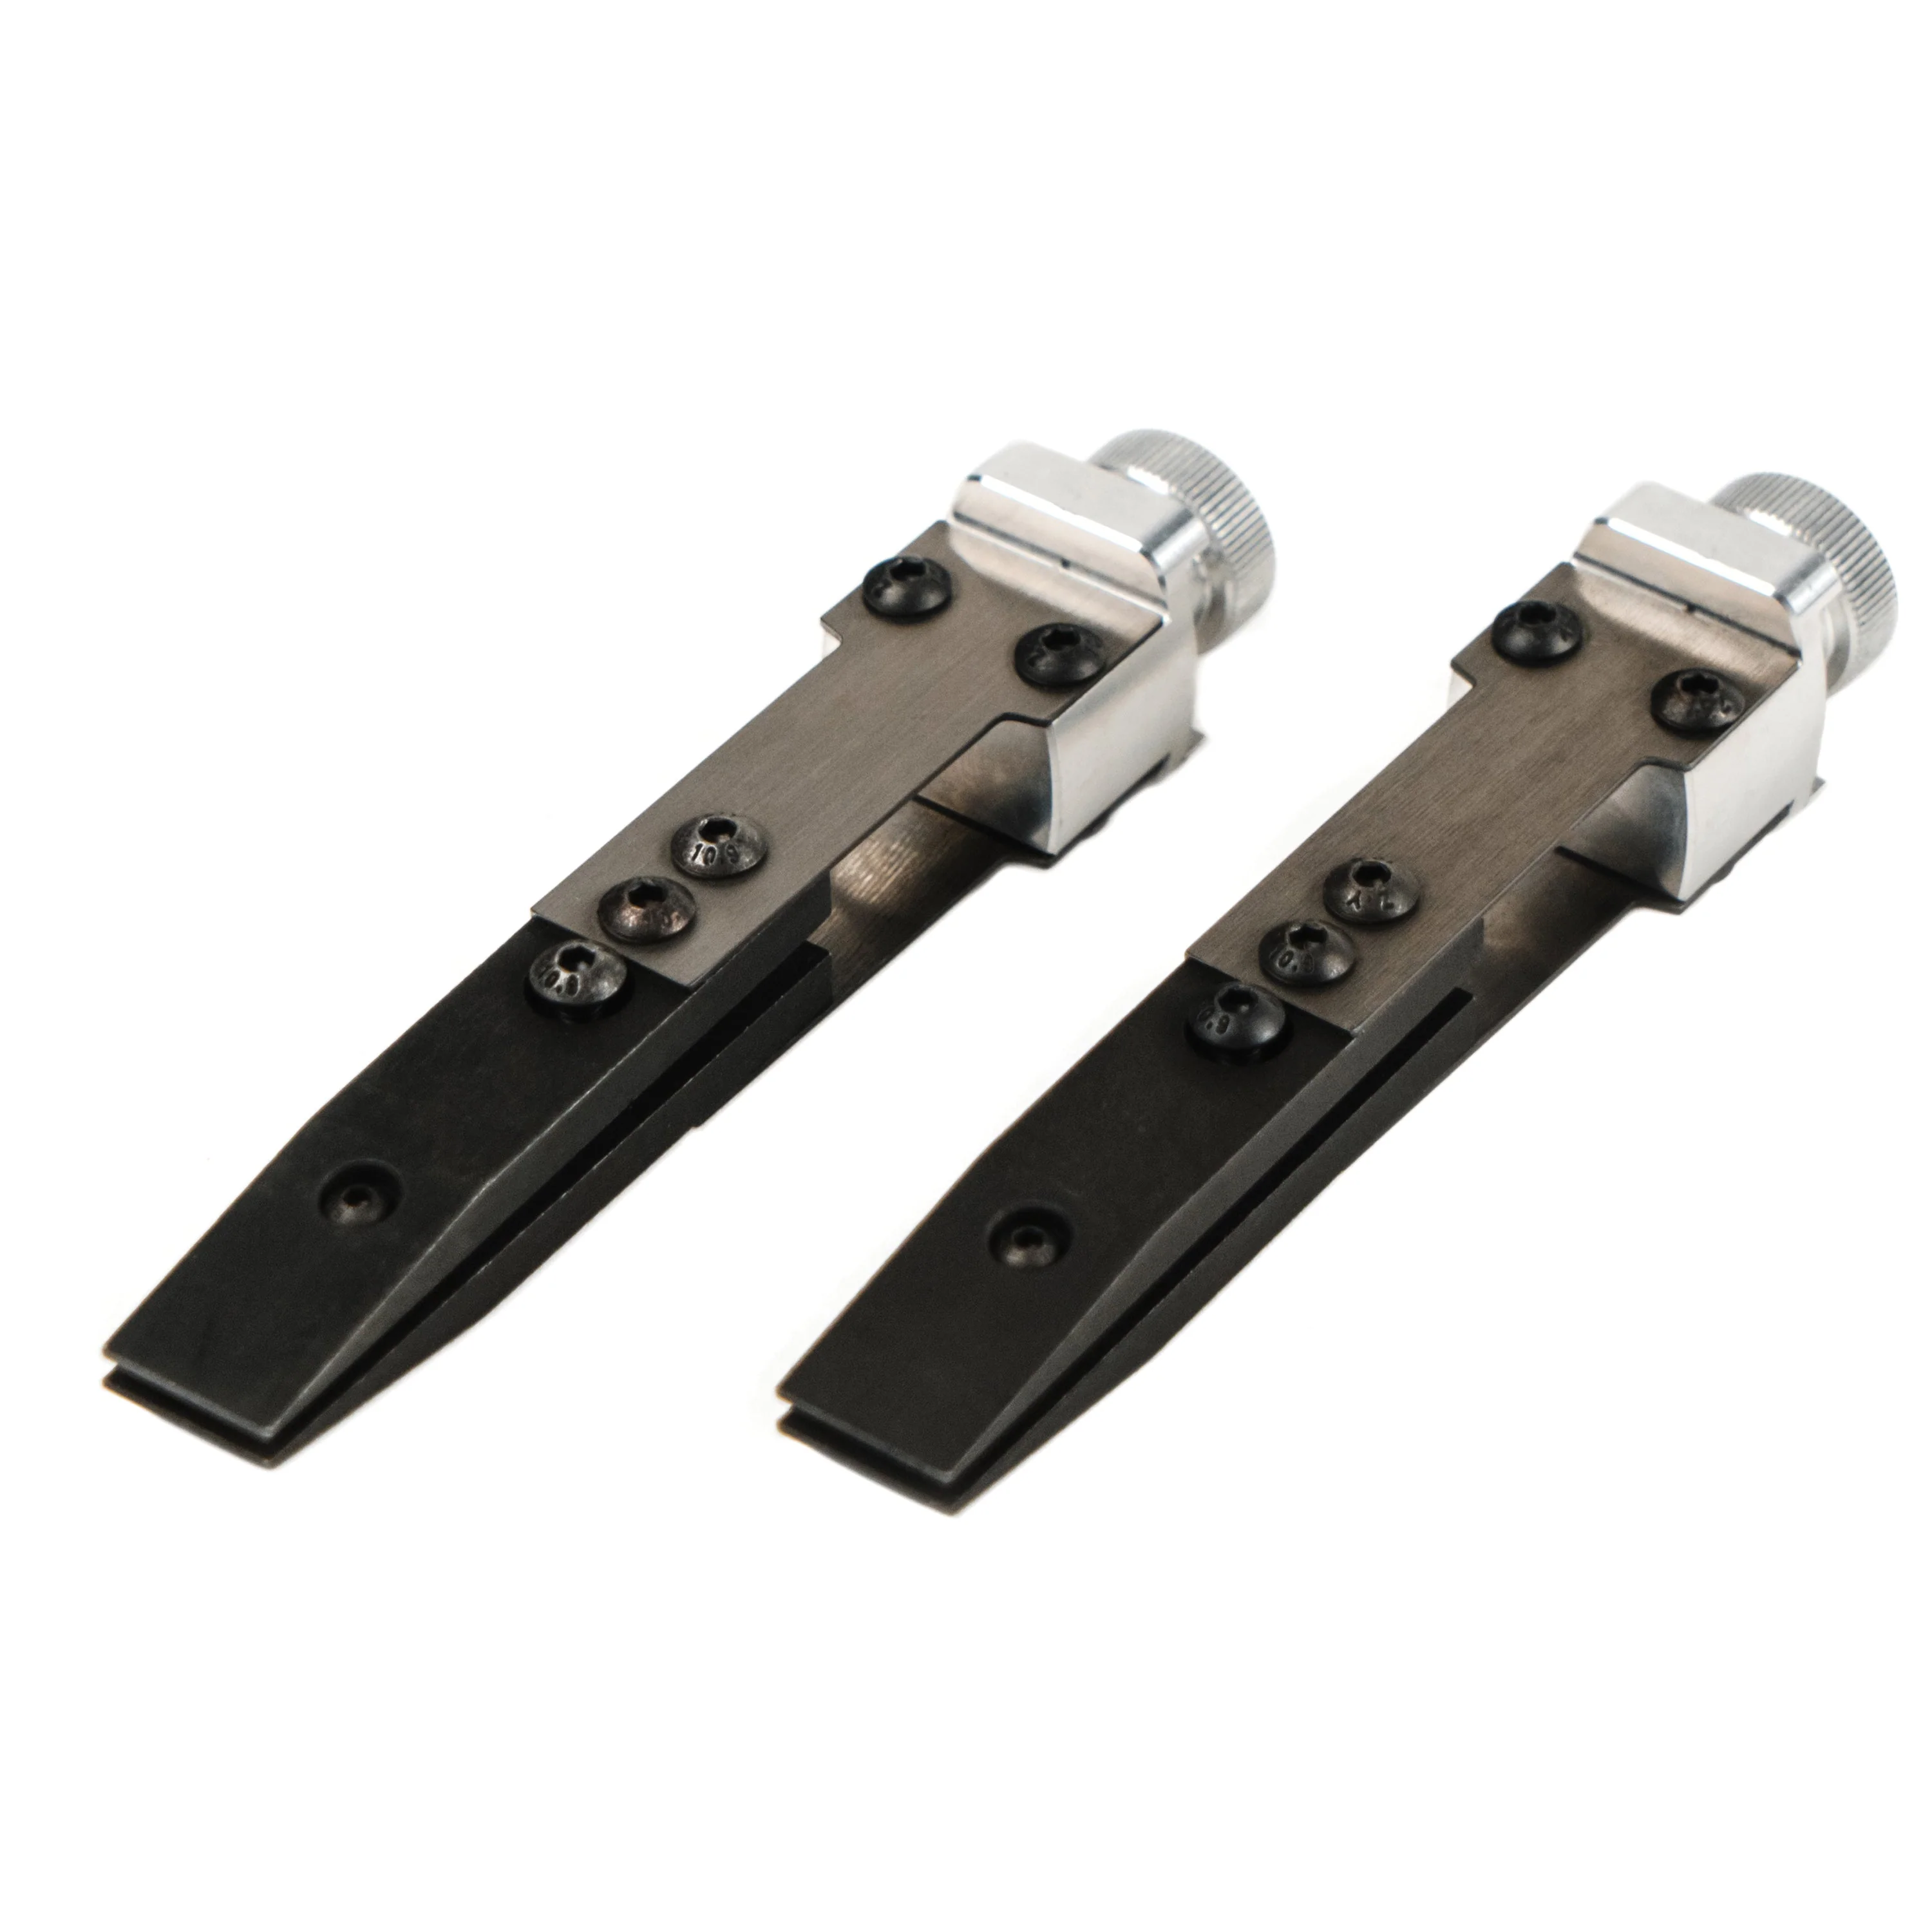 K03 Double Fillet Clamps (Set of 2) Questions & Answers